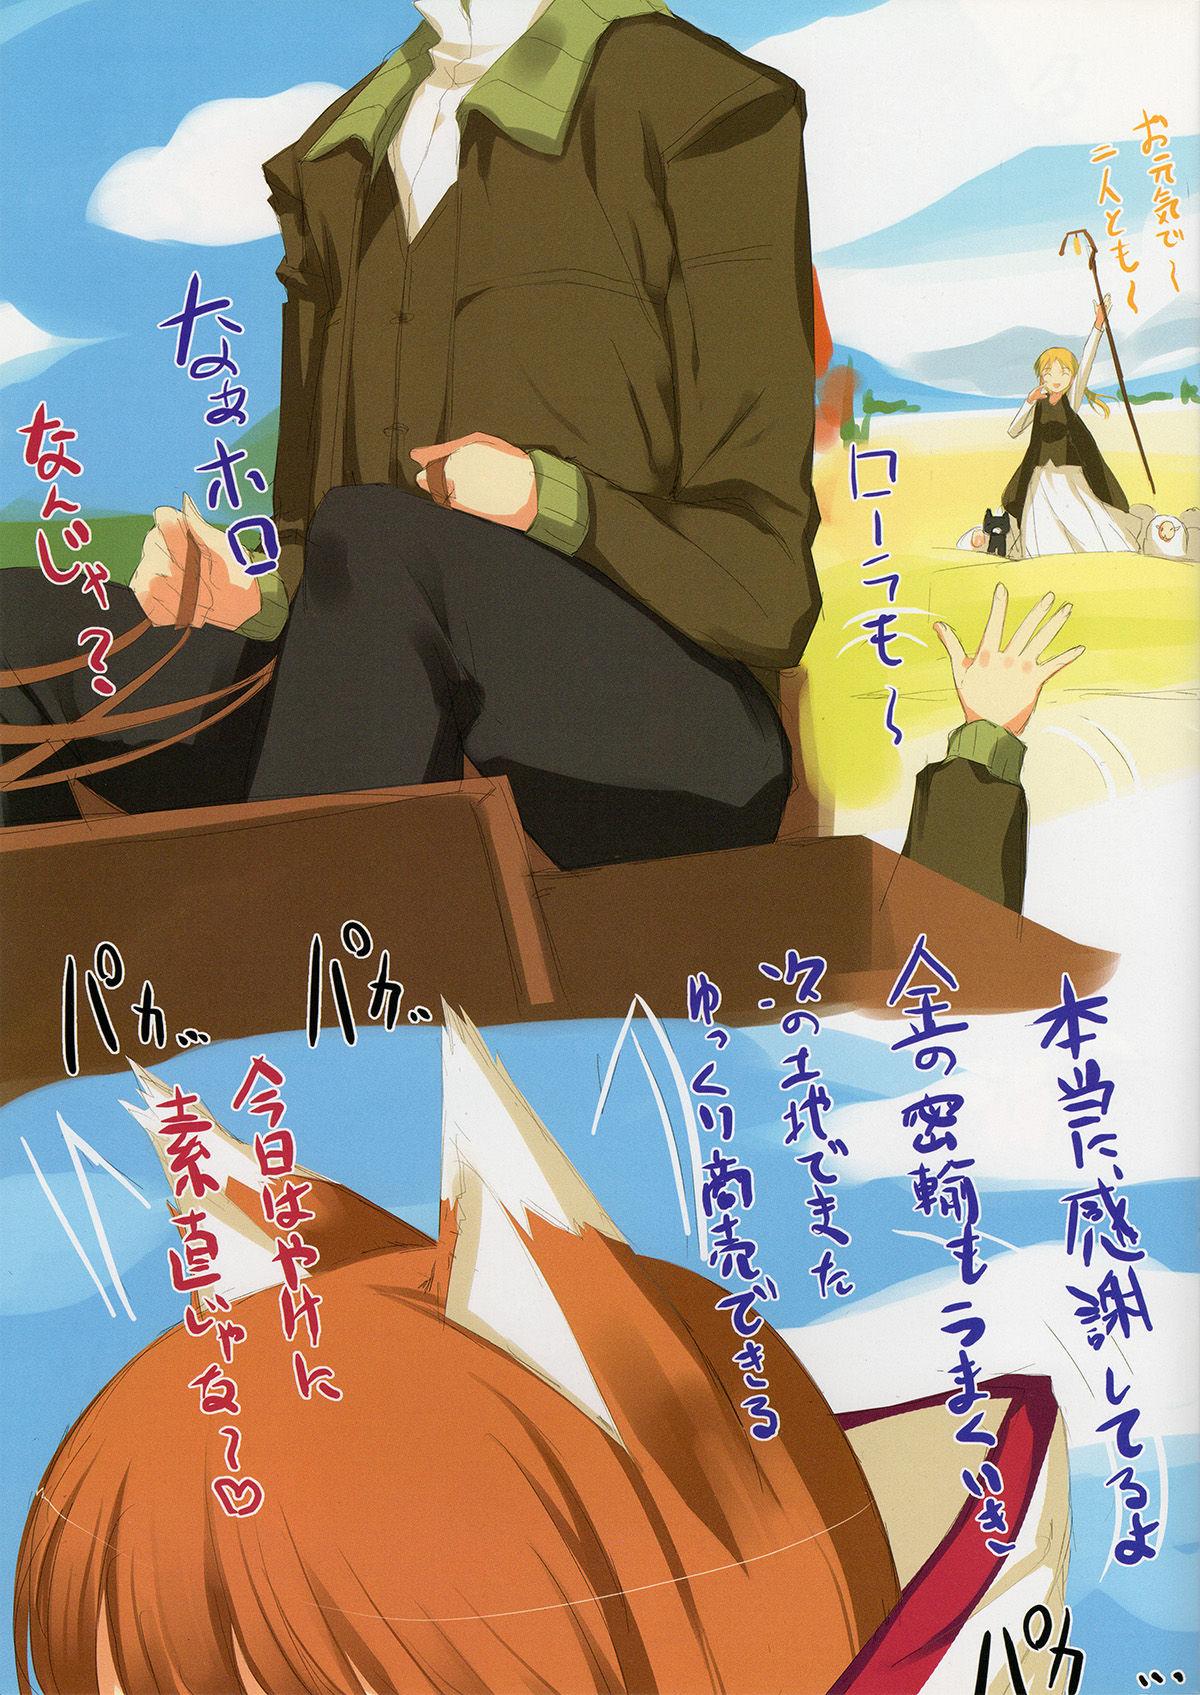 Piercing Ookami no Kimagure Hon - Spice and wolf Buttplug - Page 2